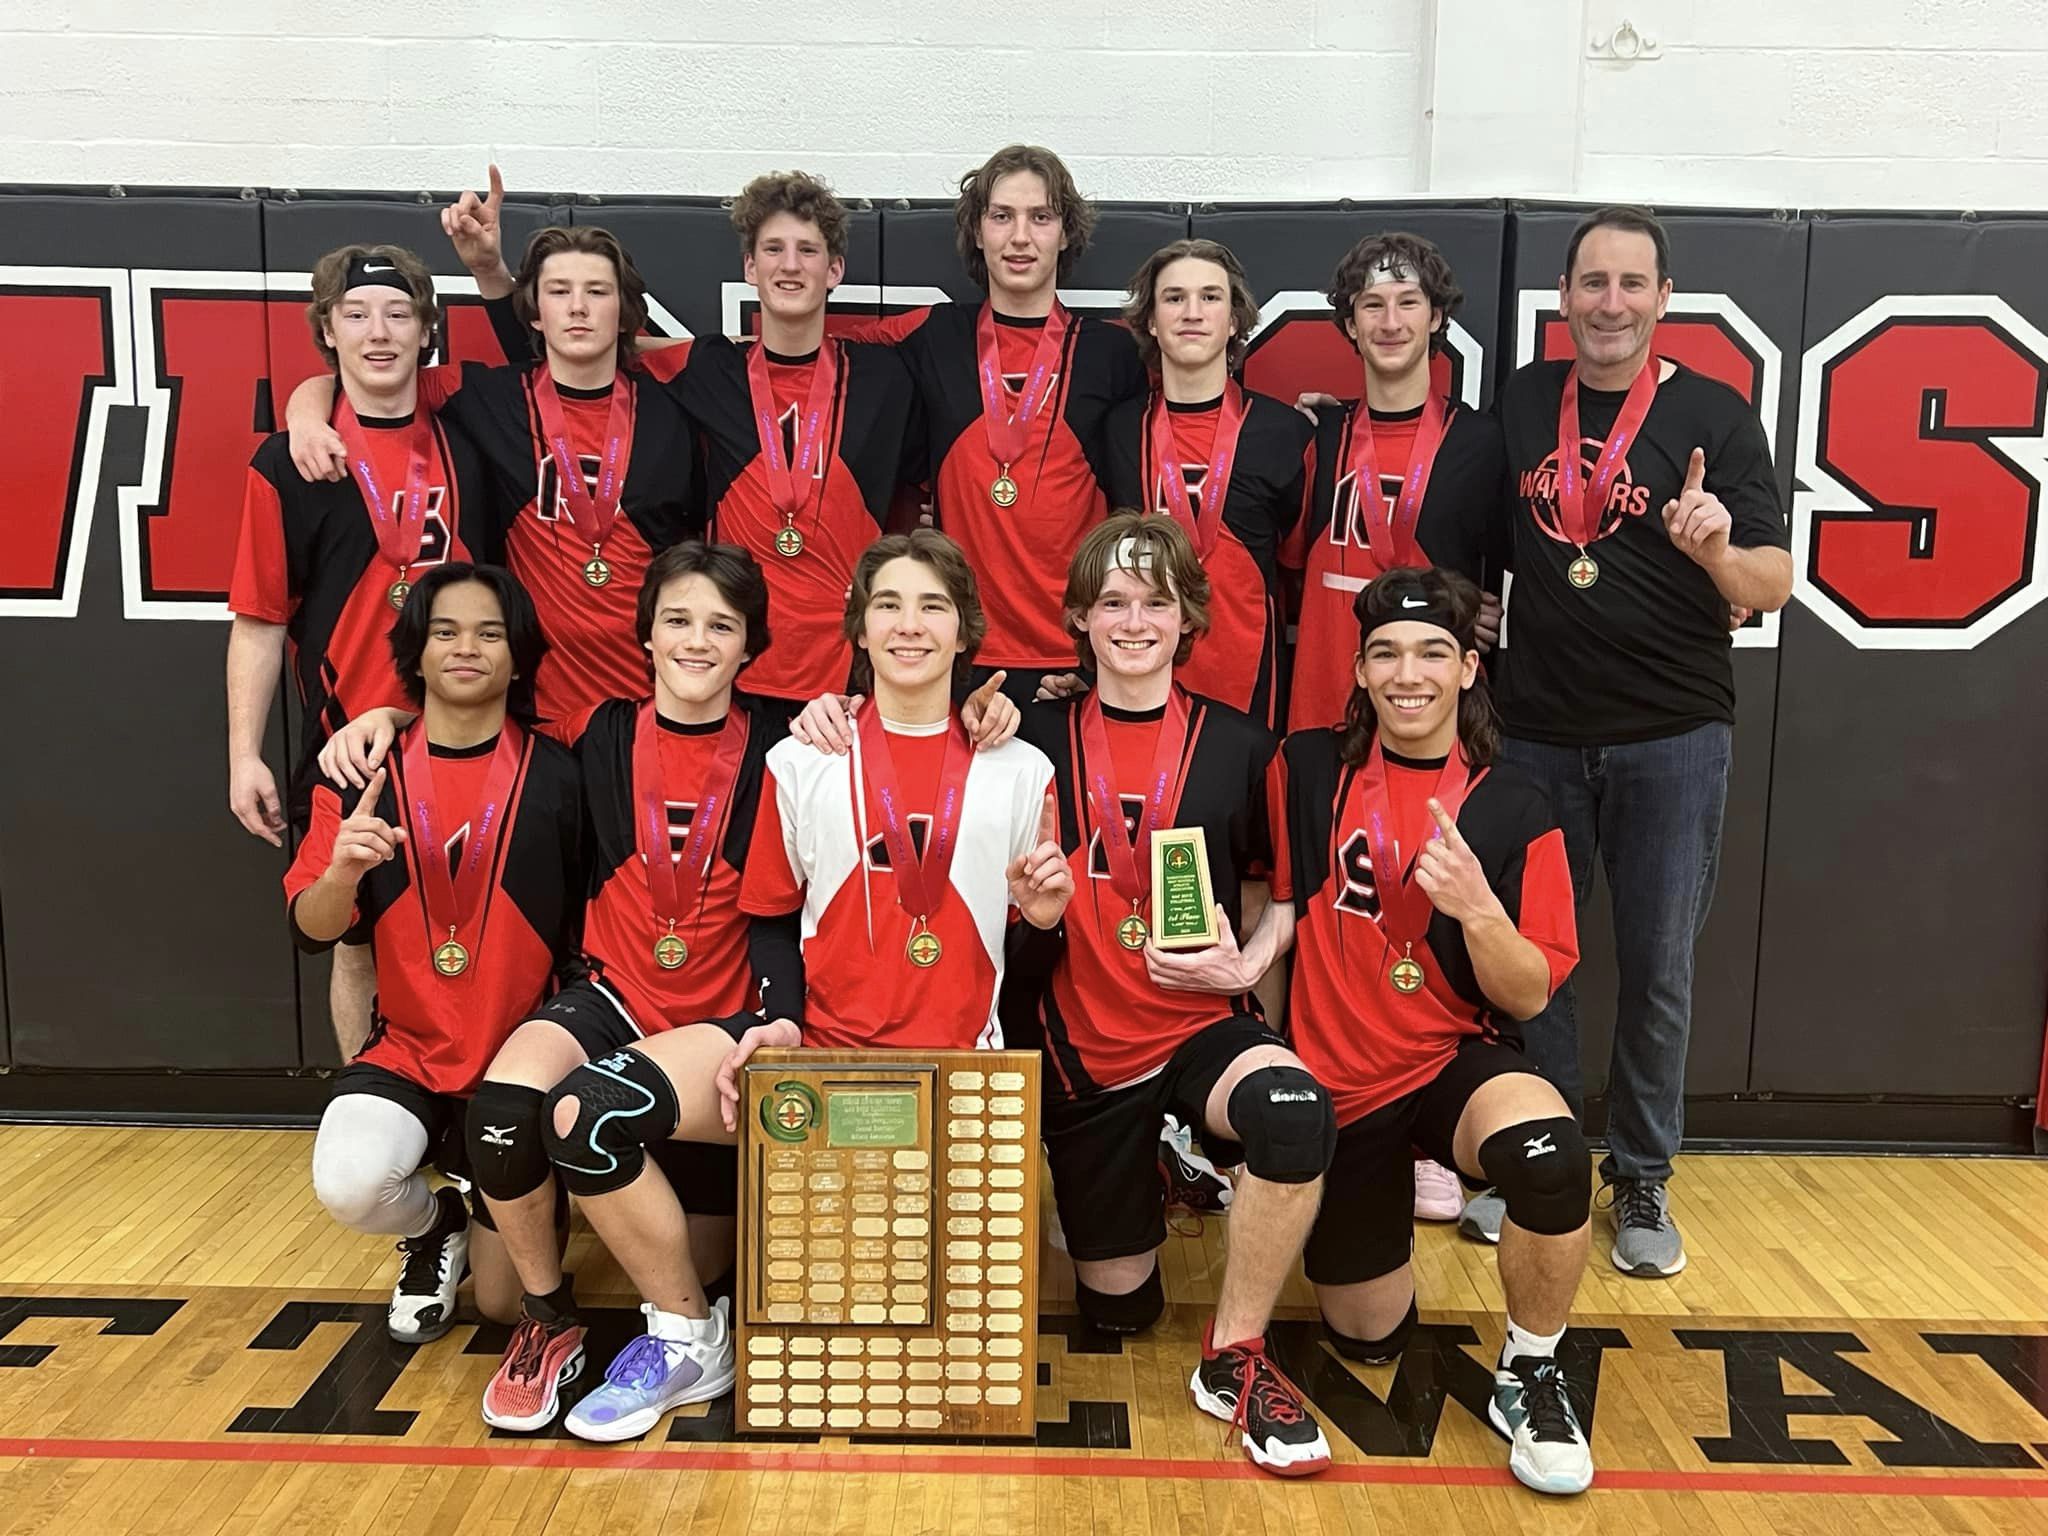 The Esterhazy Warriors Senior Boys Volleyball Team won the 3A Provincial Volleyball championship on Saturday, November 25th.